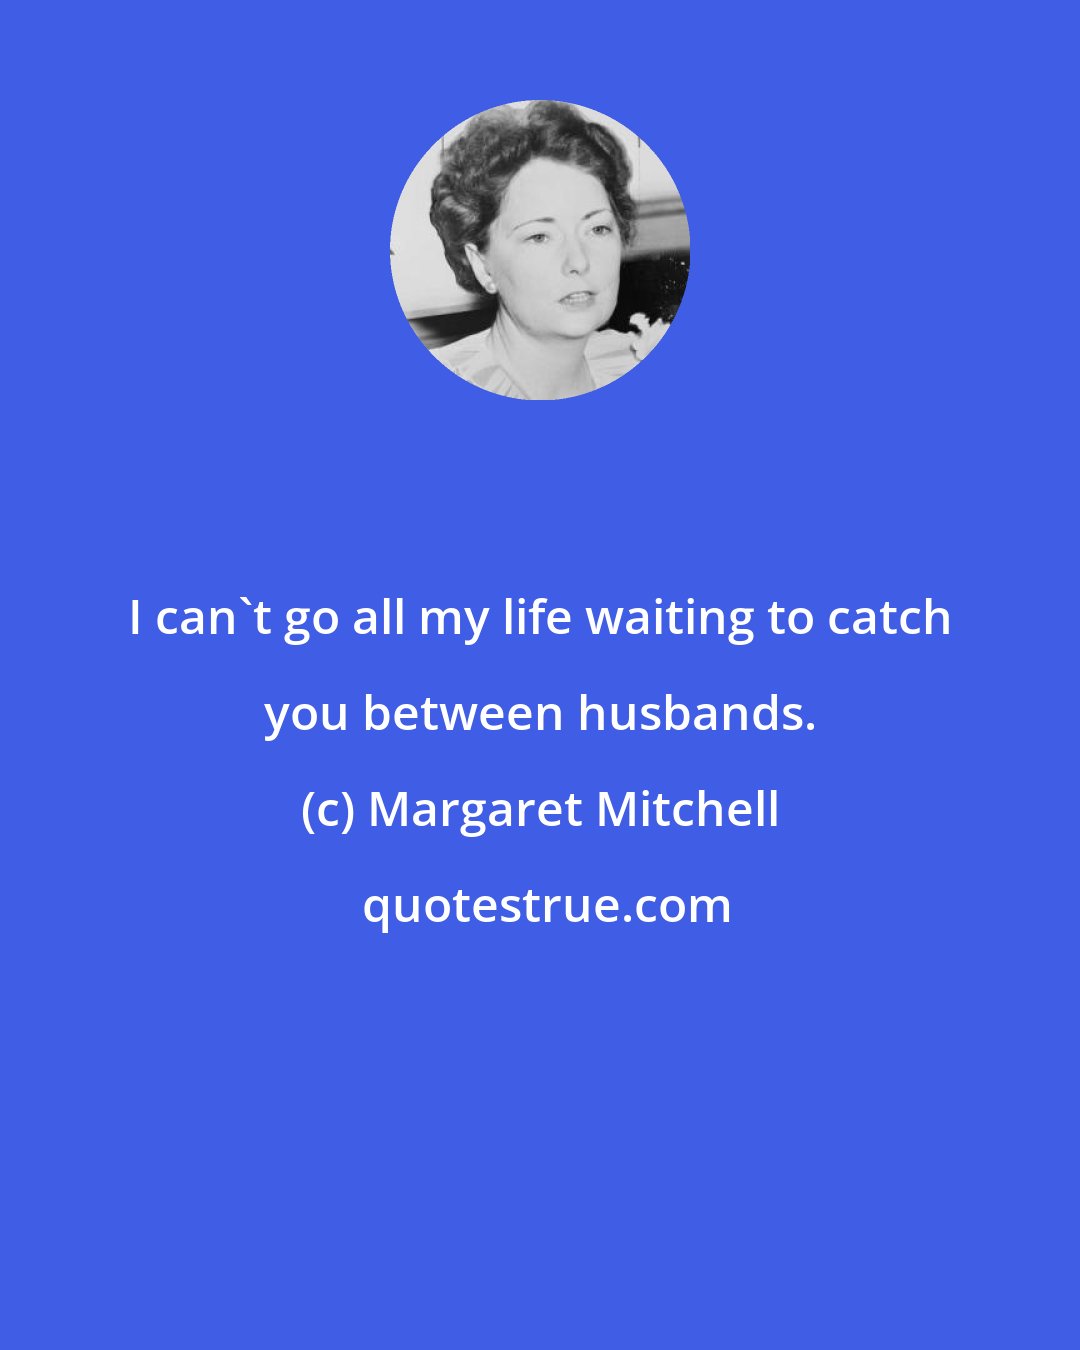 Margaret Mitchell: I can't go all my life waiting to catch you between husbands.